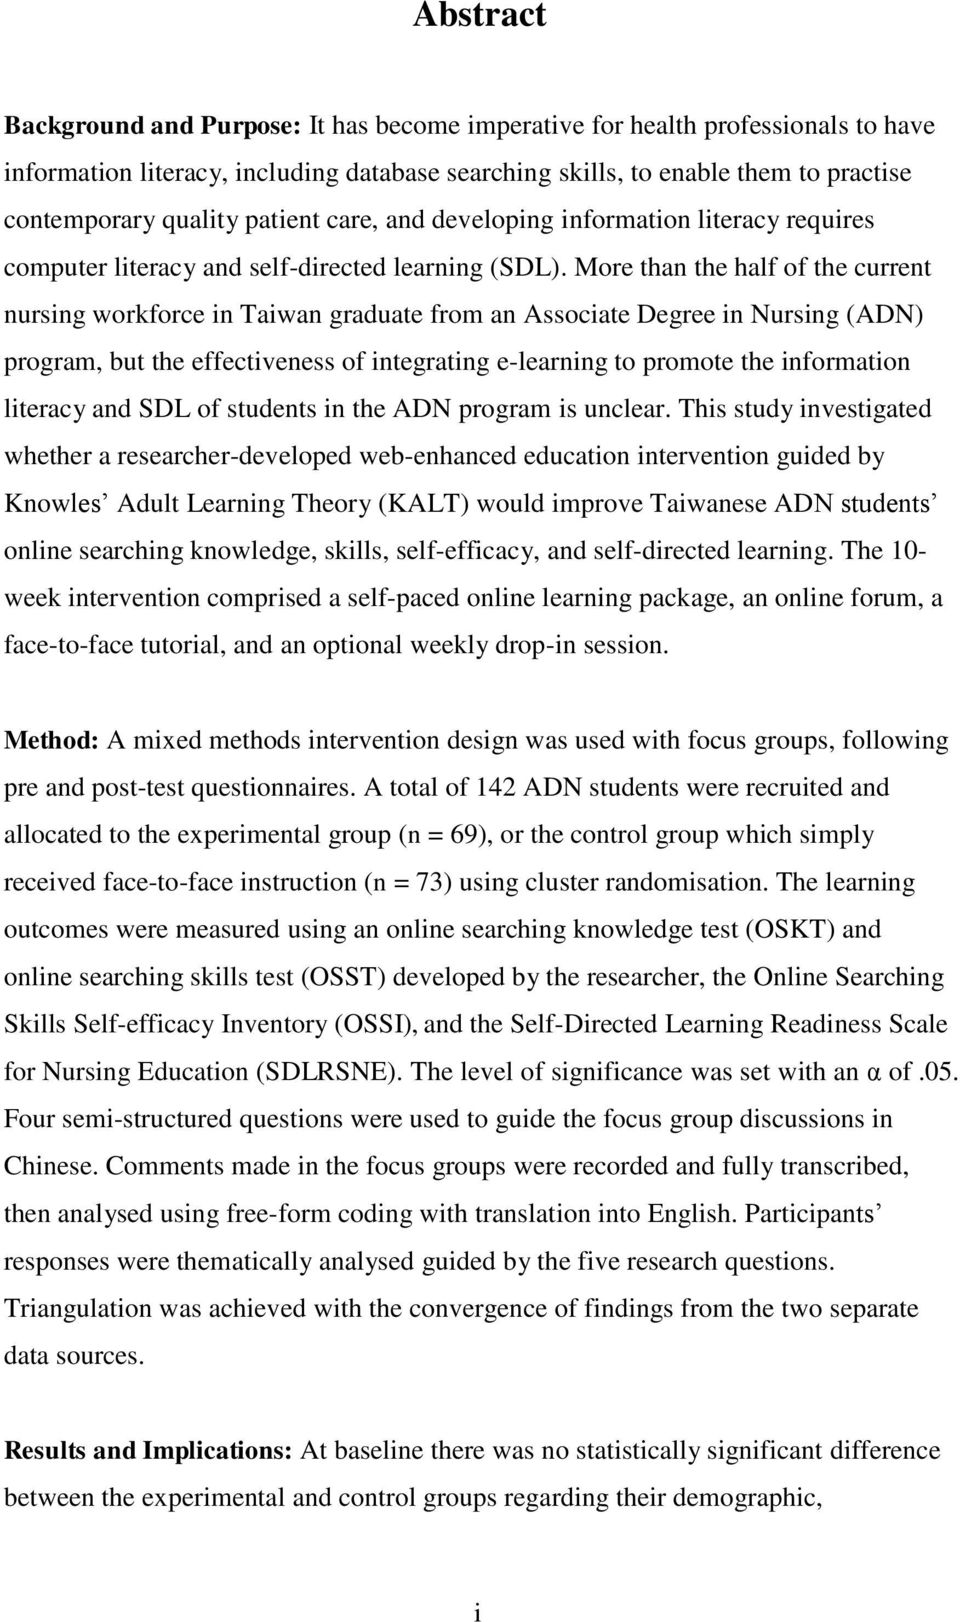 More than the half of the current nursing workforce in Taiwan graduate from an Associate Degree in Nursing (ADN) program, but the effectiveness of integrating e-learning to promote the information